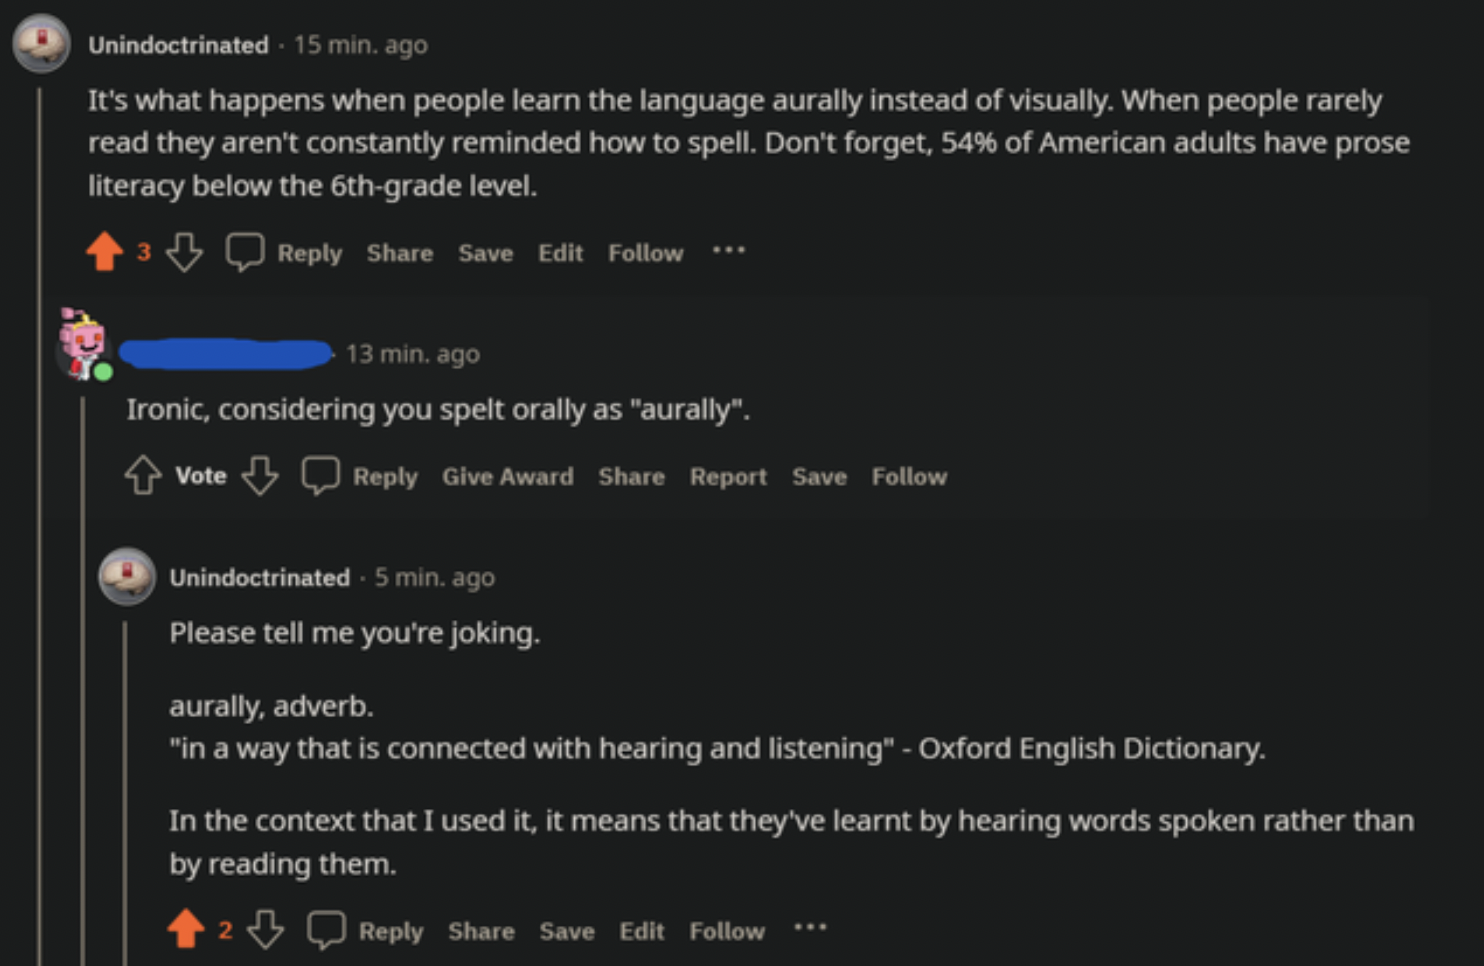 Confidently Incorrect - It's what happens when people learn the language aurally instead of visually. When people rarely read they aren't constantly reminded how to spell. Don't forget, 54% of American adults have prose literacy below the 6thg